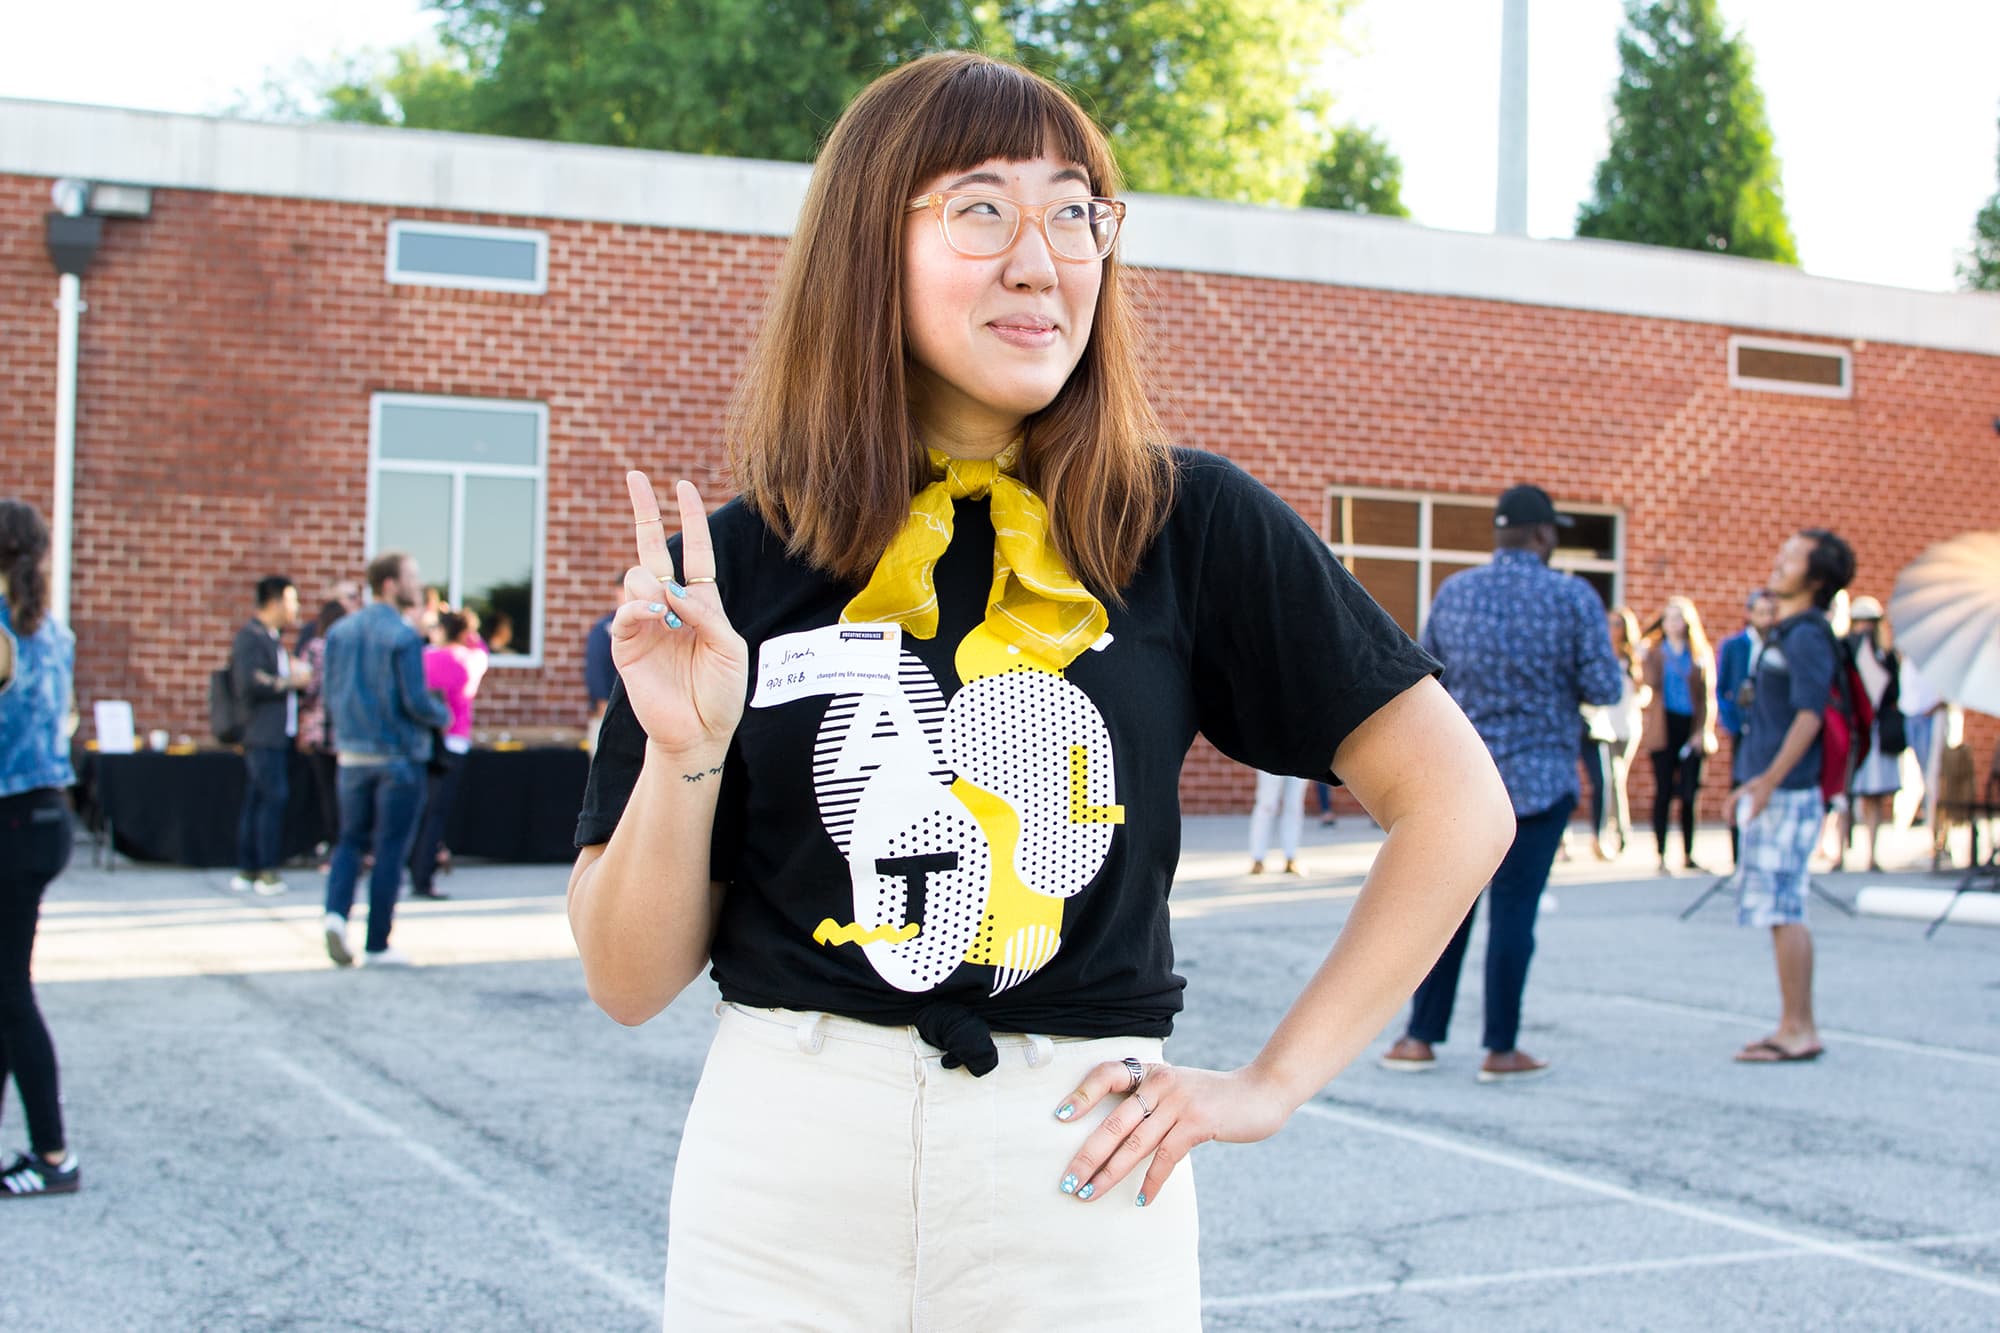 A person wearing glasses and holding up a peace sign showing off their free t-shirt they received at a local event for creatives.